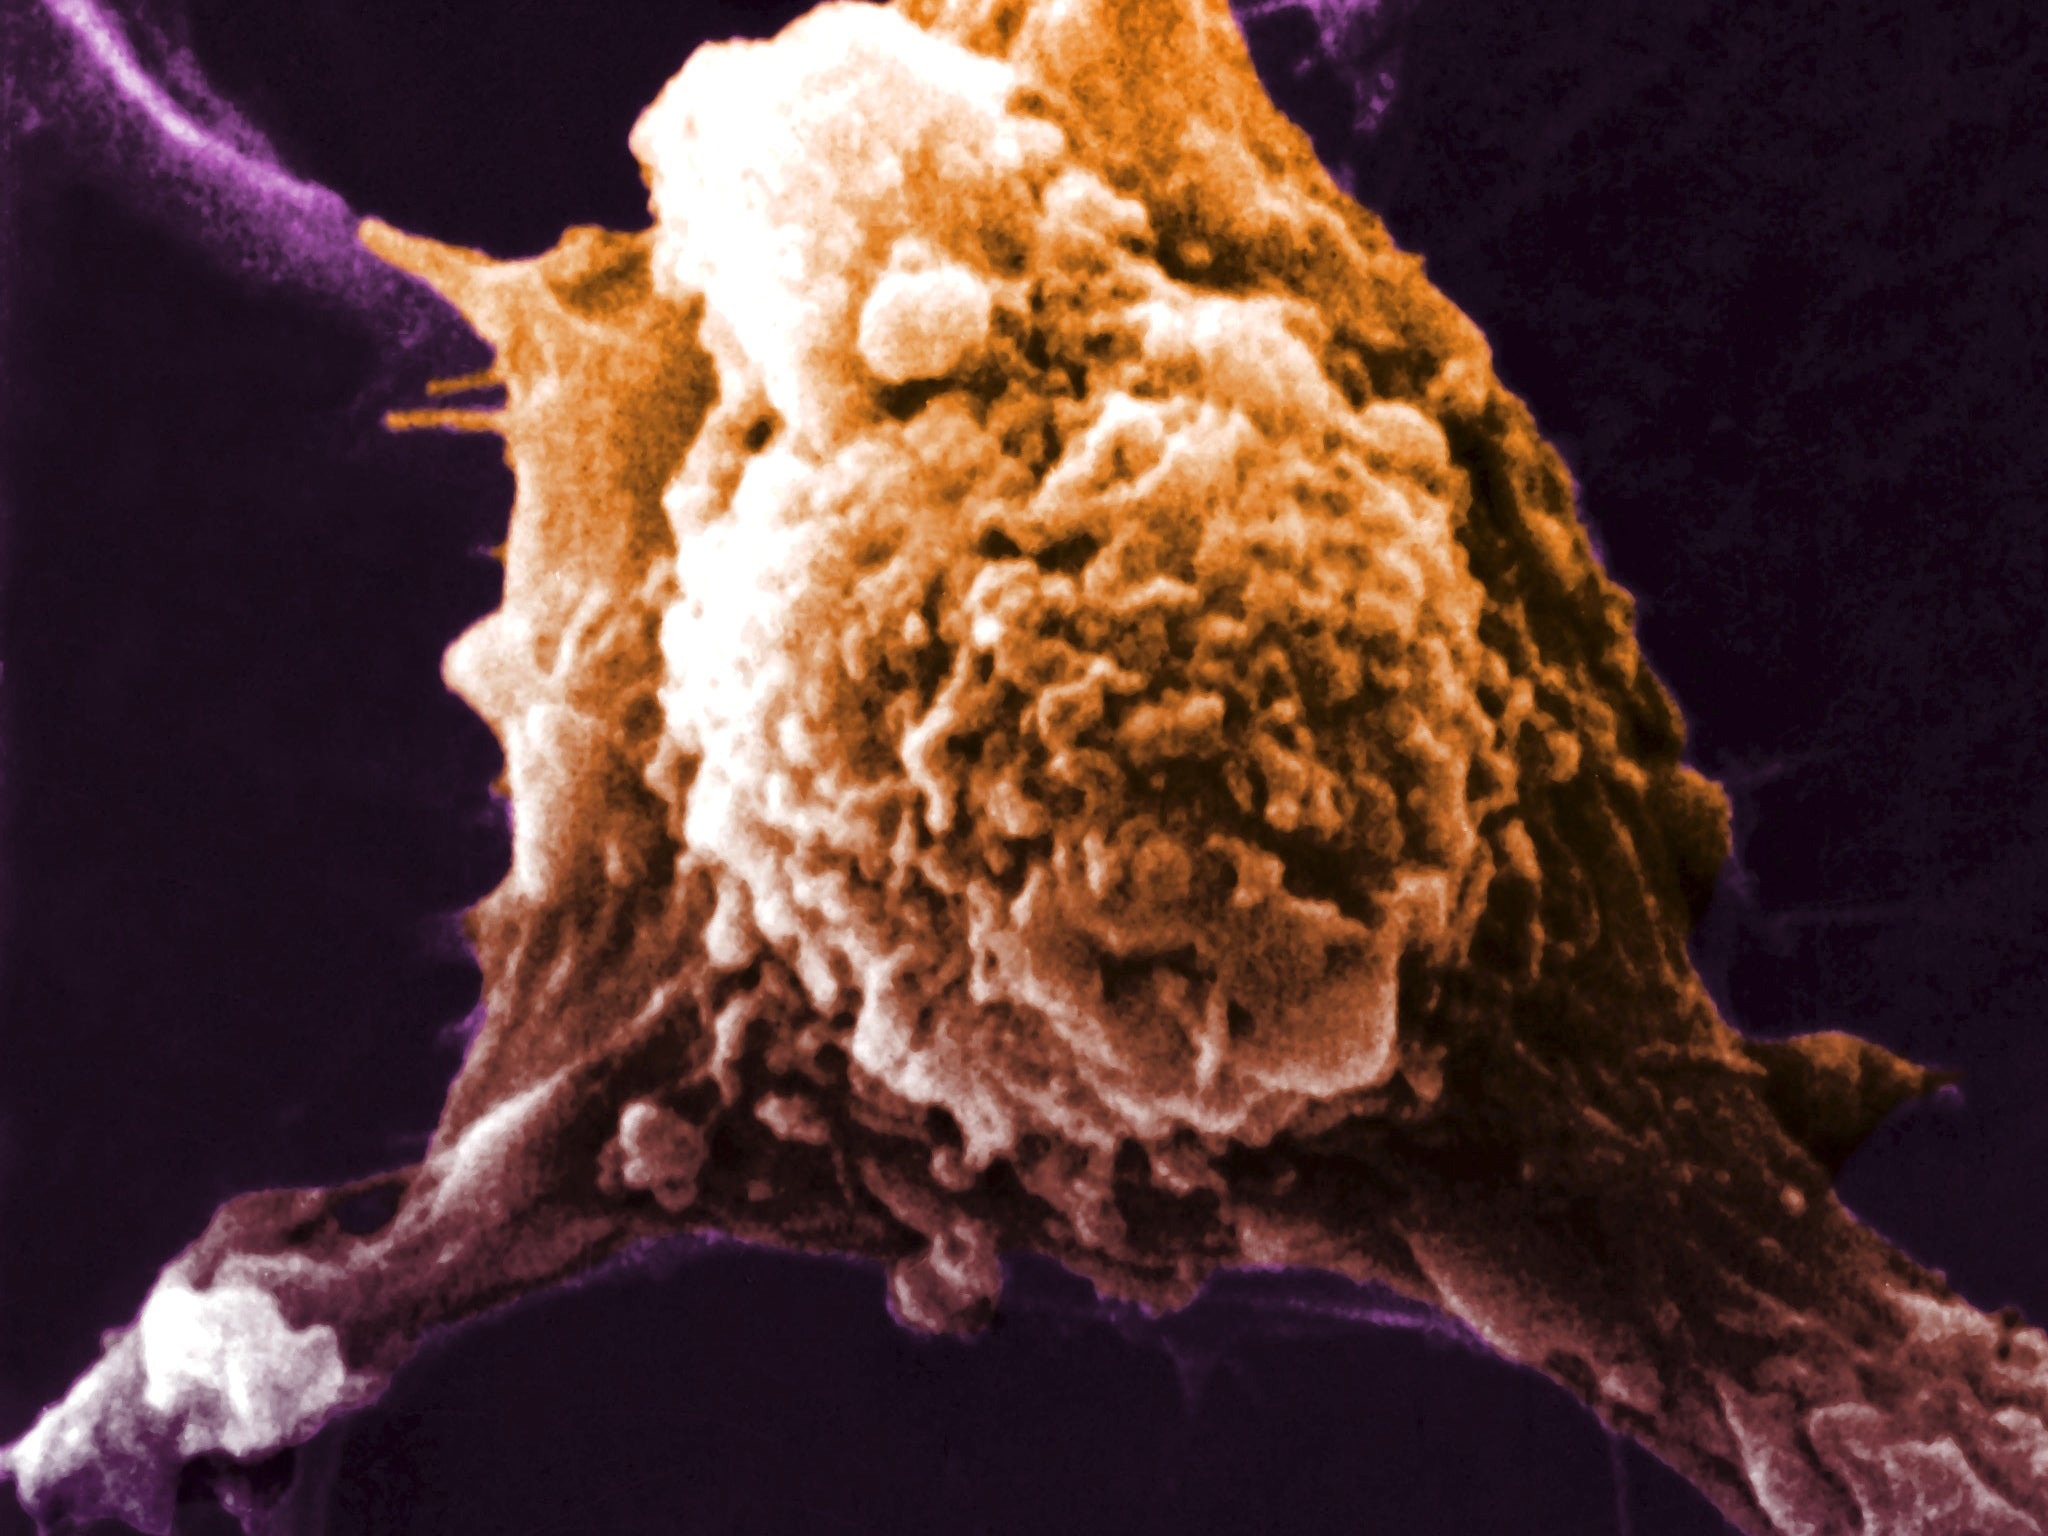 The vaccine prompted the body to make killer T-cells designed to attack cancer cells like the one above